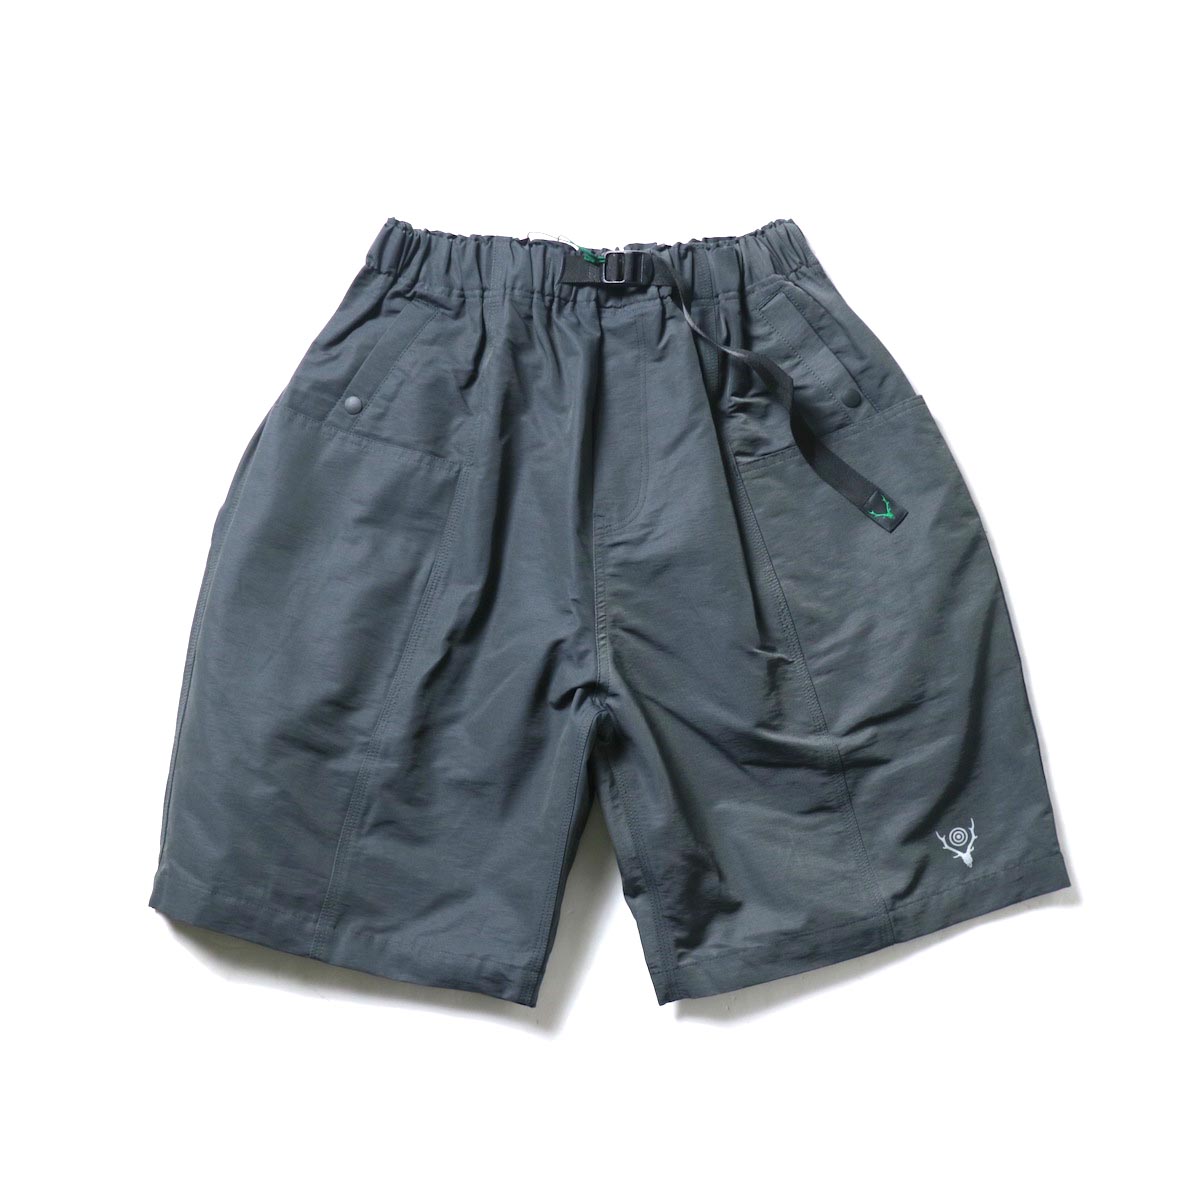 South2 West8 / BELTED C.S. SHORT - C/N GROSGRAIN (Charcoal)正面